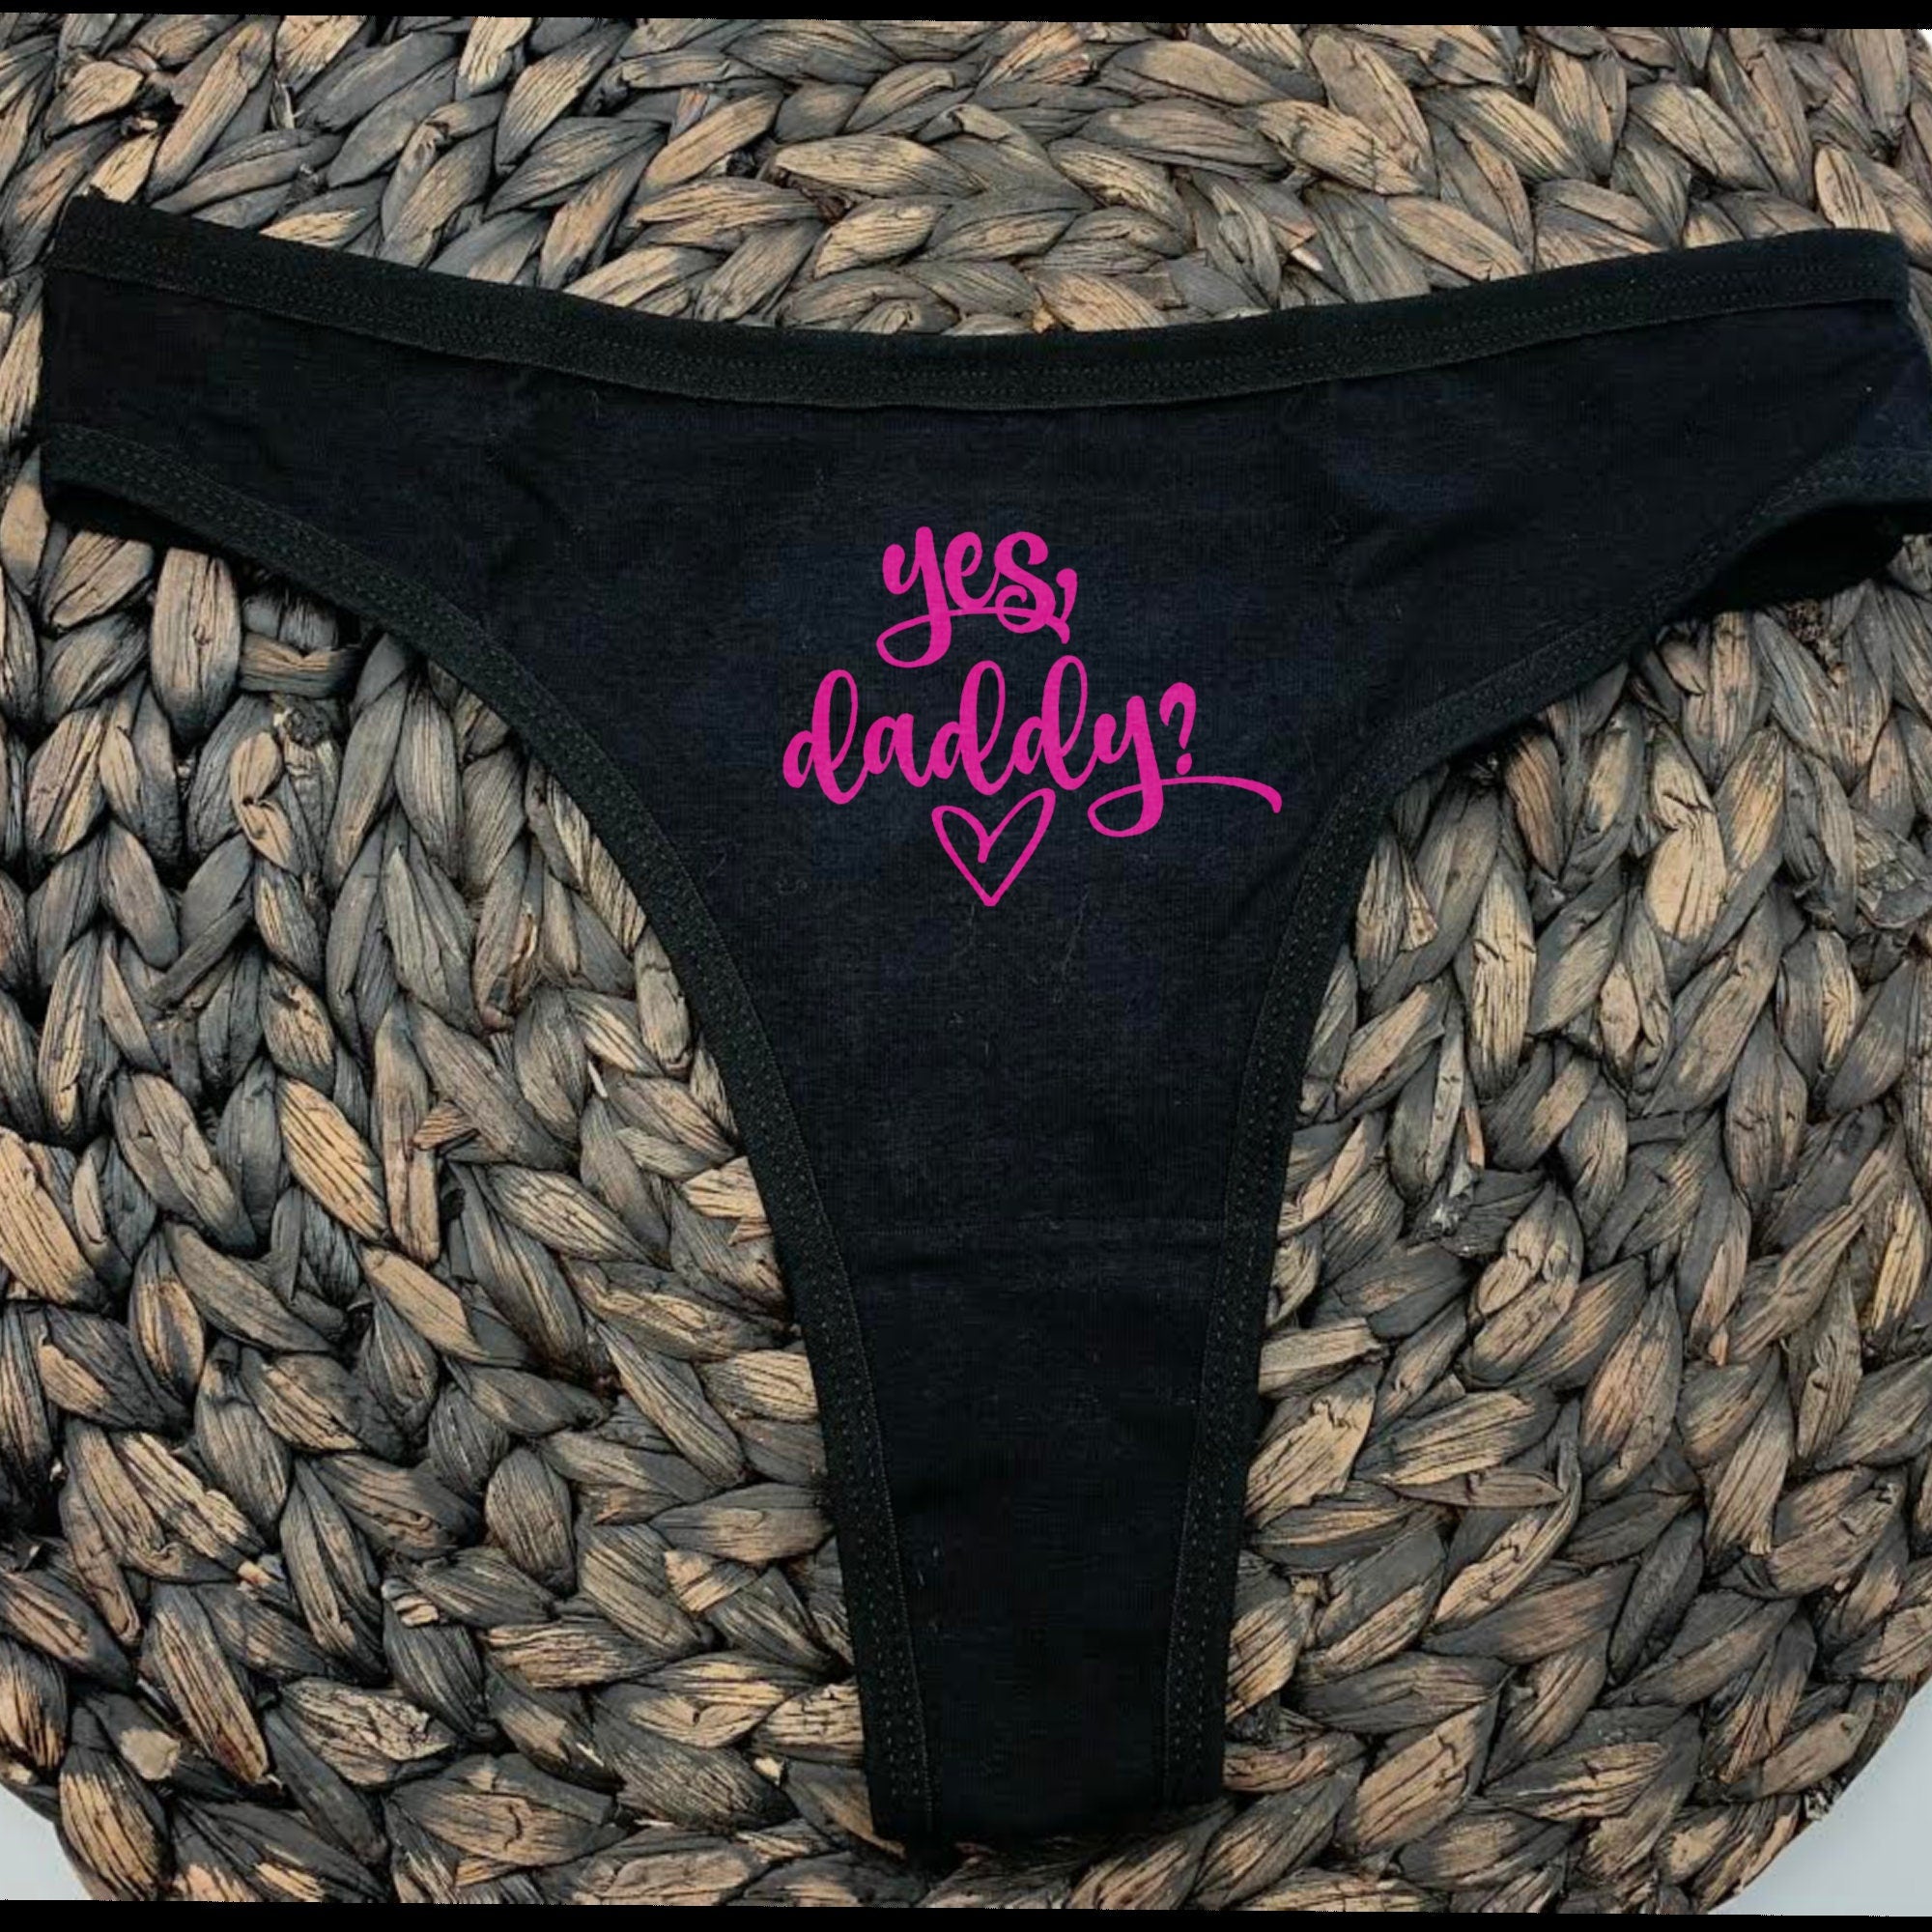 Funny Valentine's Gift for Her - 'Yes, Daddy' Thong - Playful and Comfortable Lingerie